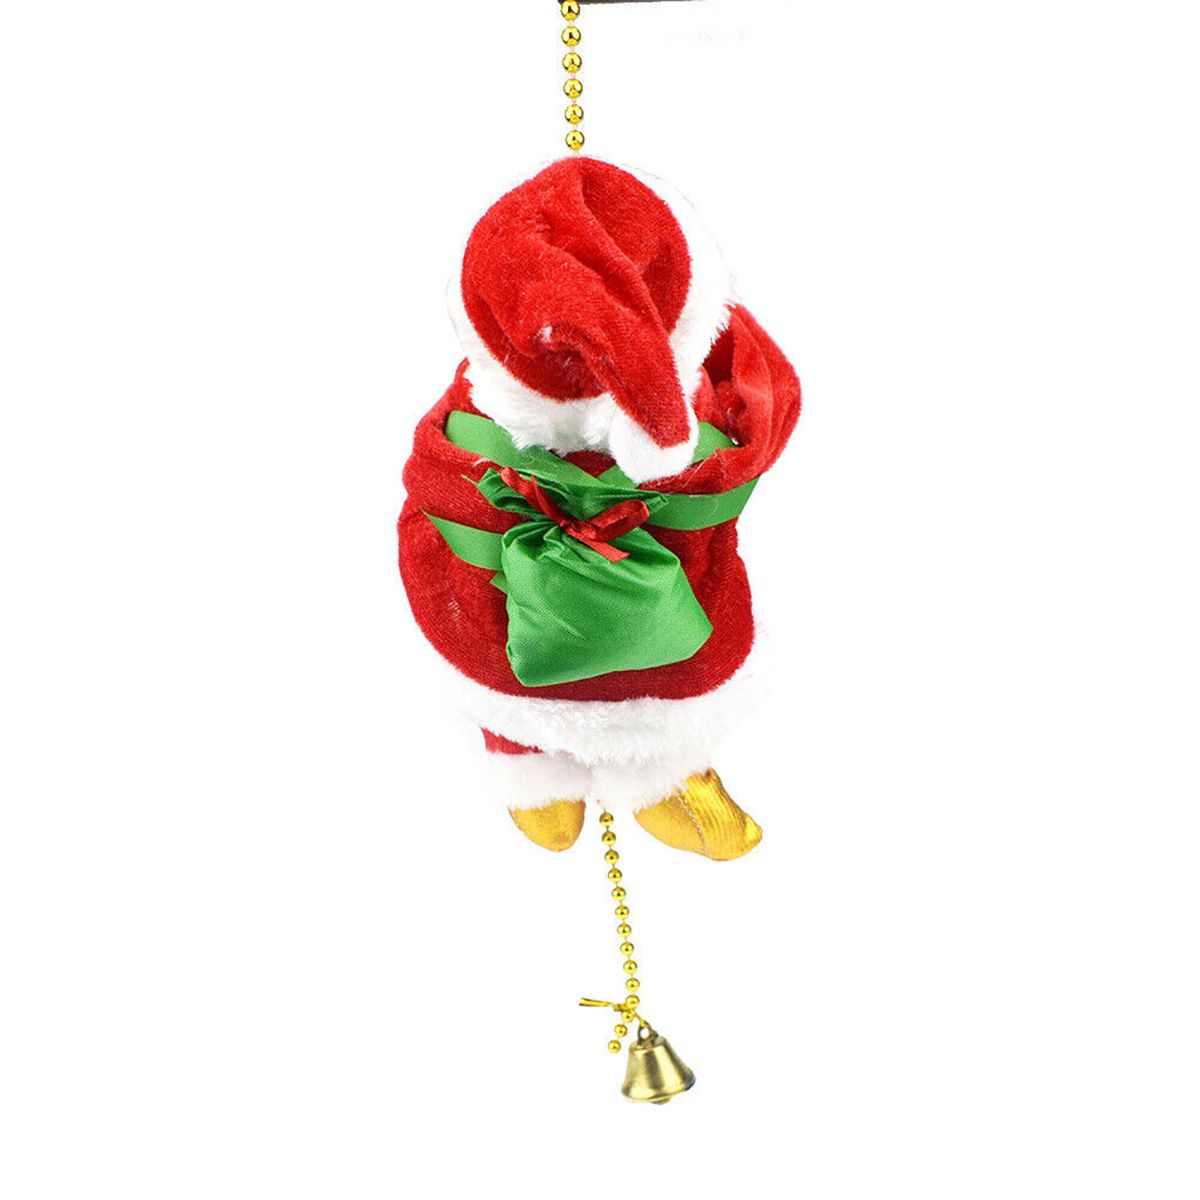 Electric-Santa-Climbing-On-Rope-IndoorOutdoor-Christmas-Gift-Decorations-1746828